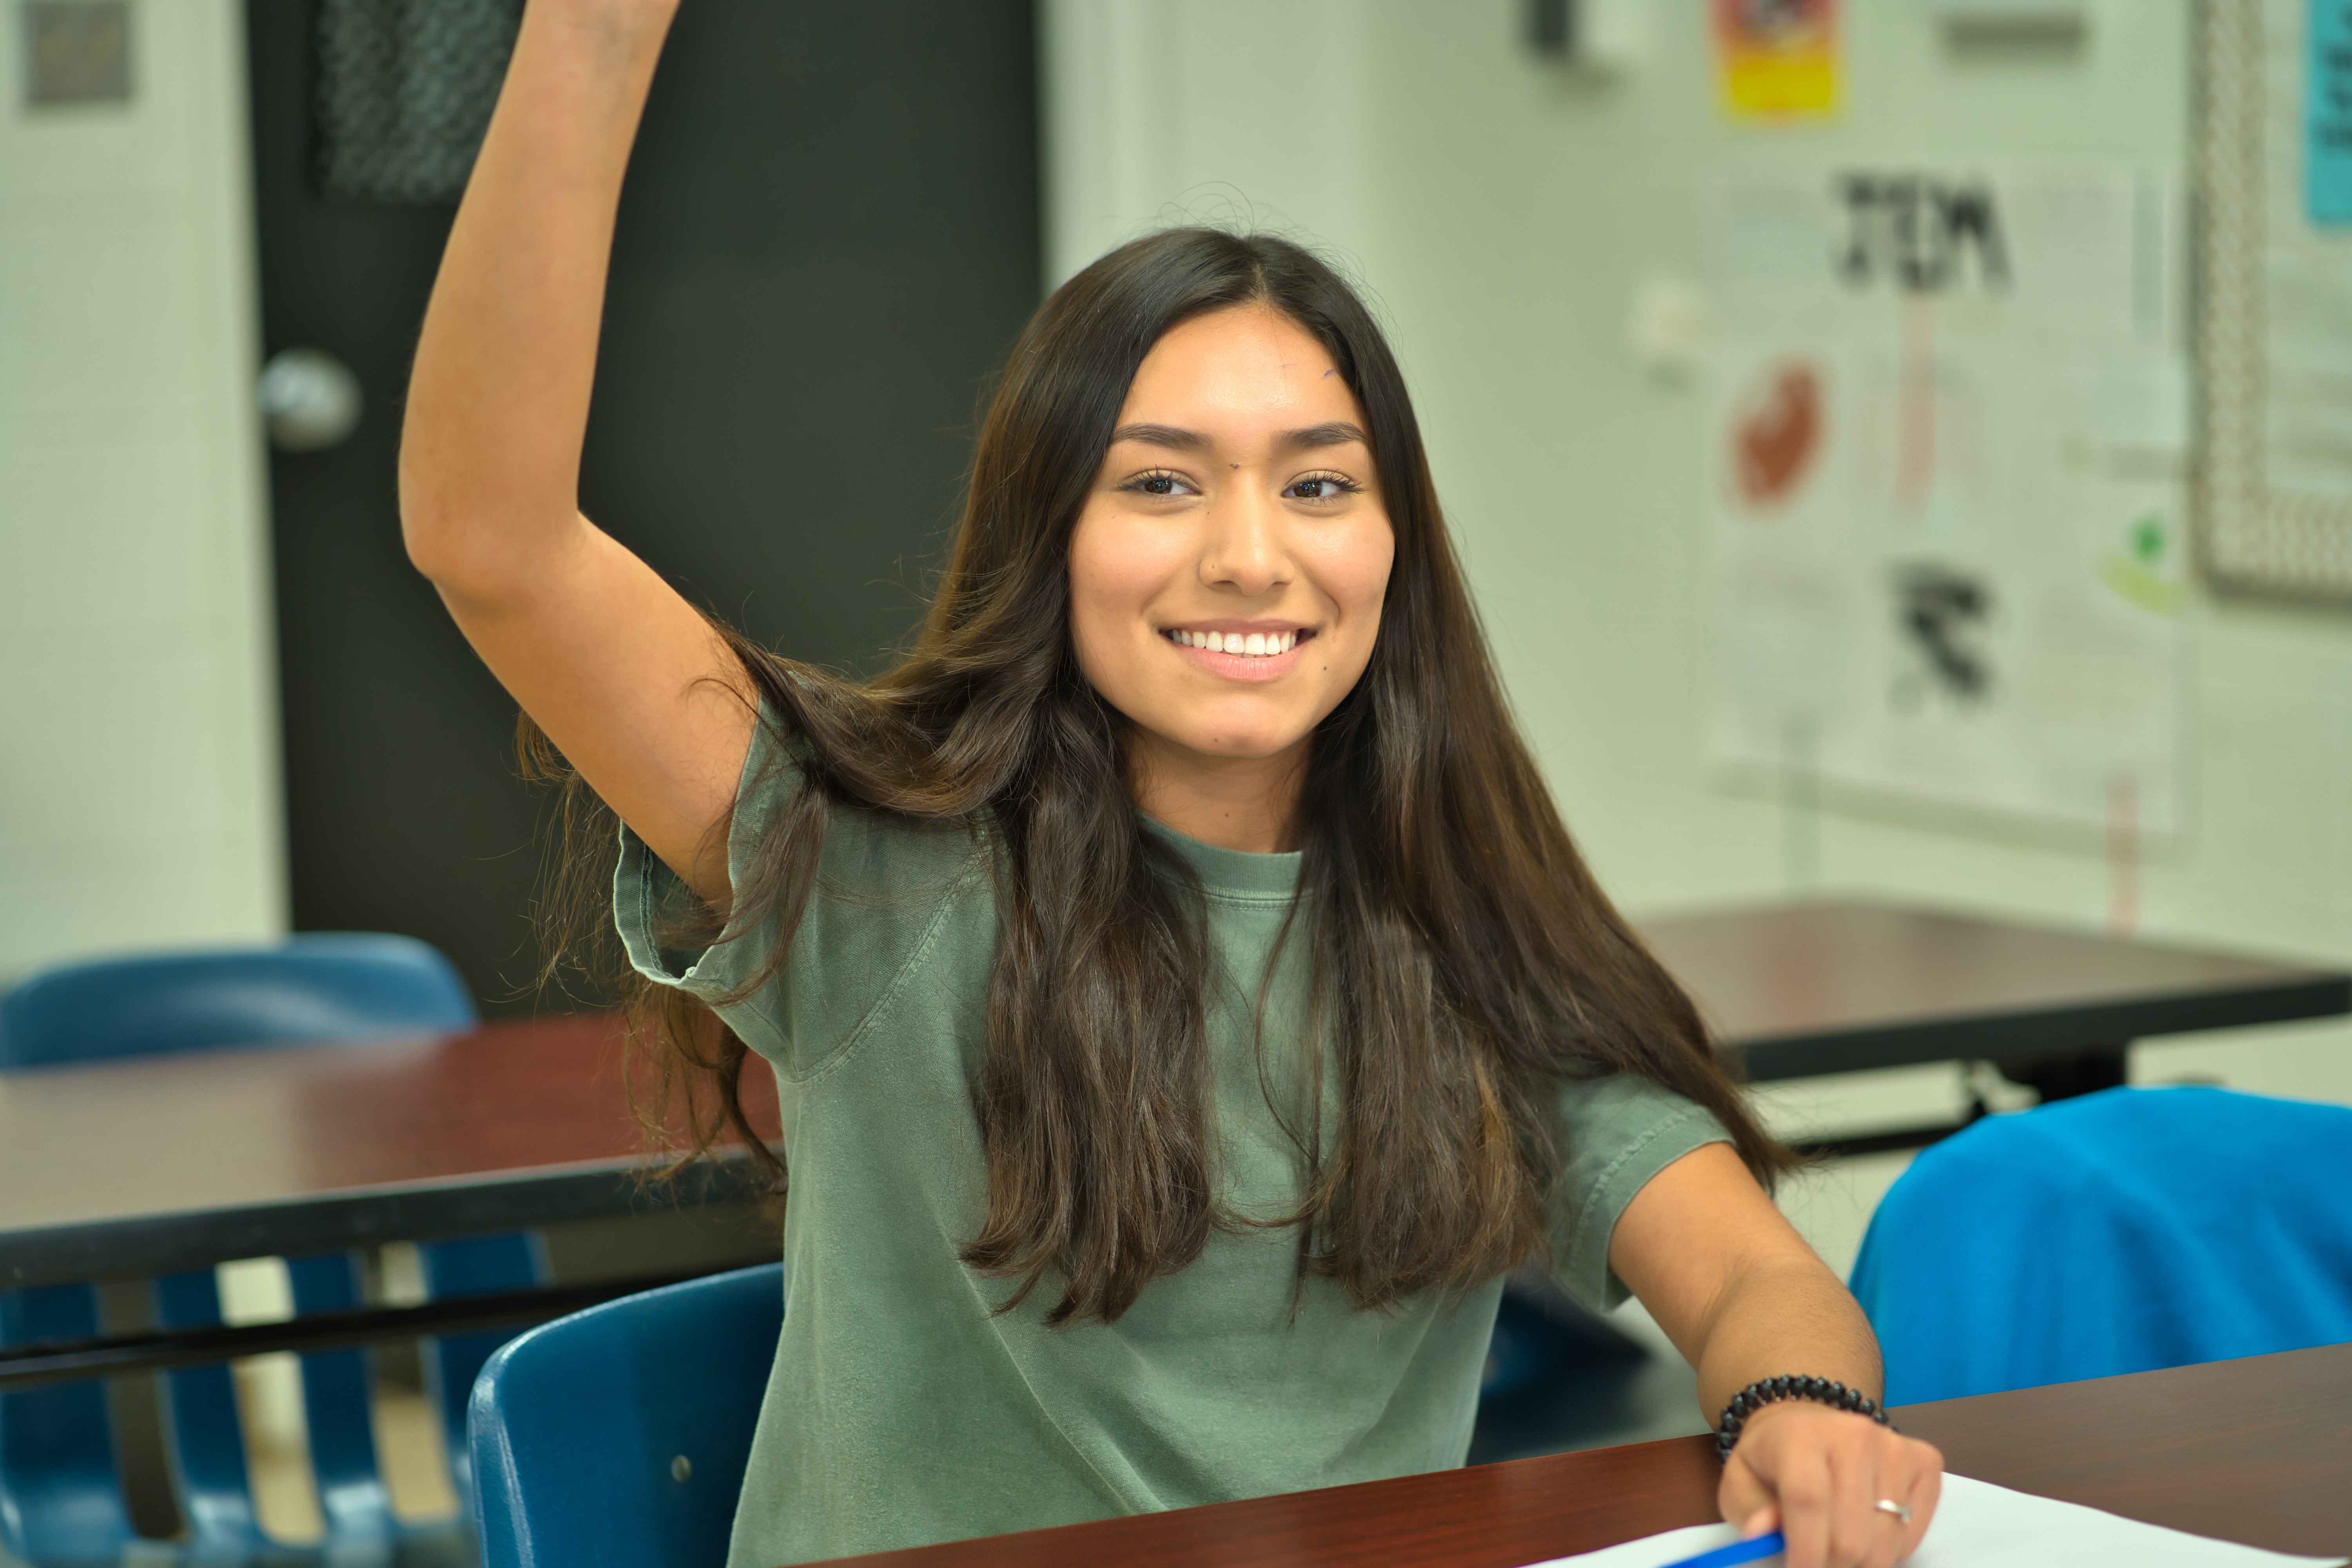 high school female student with long dark hair sitting at a desk with her hand raised.